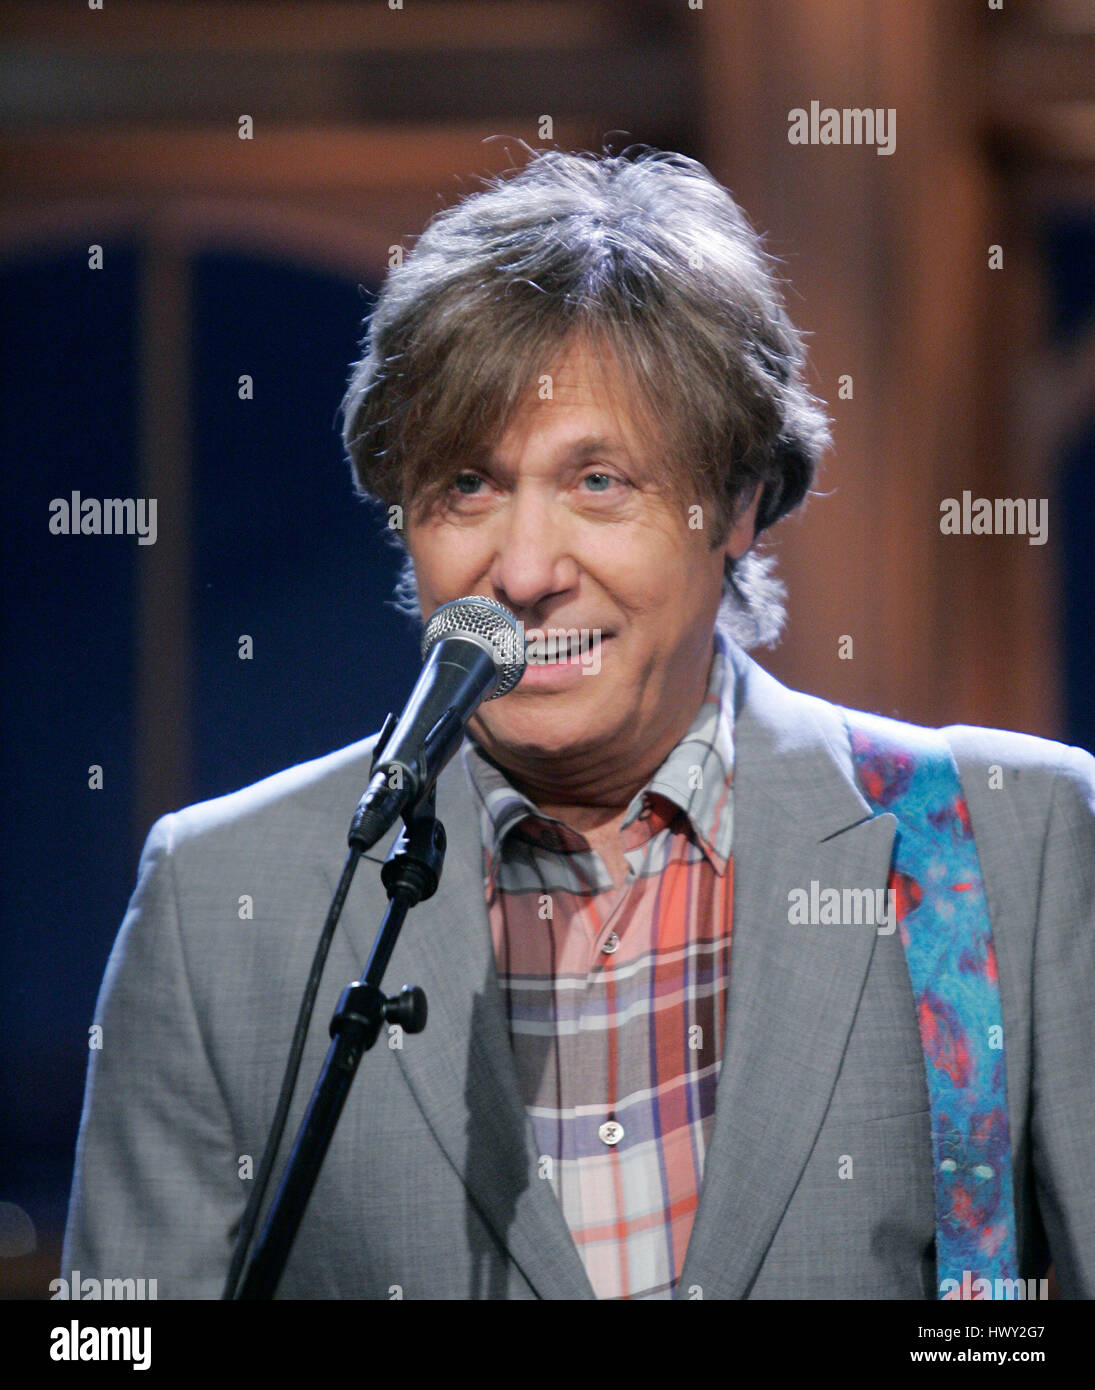 The band, Chicago, with member Robert Lamm on lead vocals and keyboard, perform during a segment of 'The Late Late Show with Craig Ferguson' at CBS Television City in Los Angeles, California, on March 9, 2009. Photo by Francis Specker Stock Photo